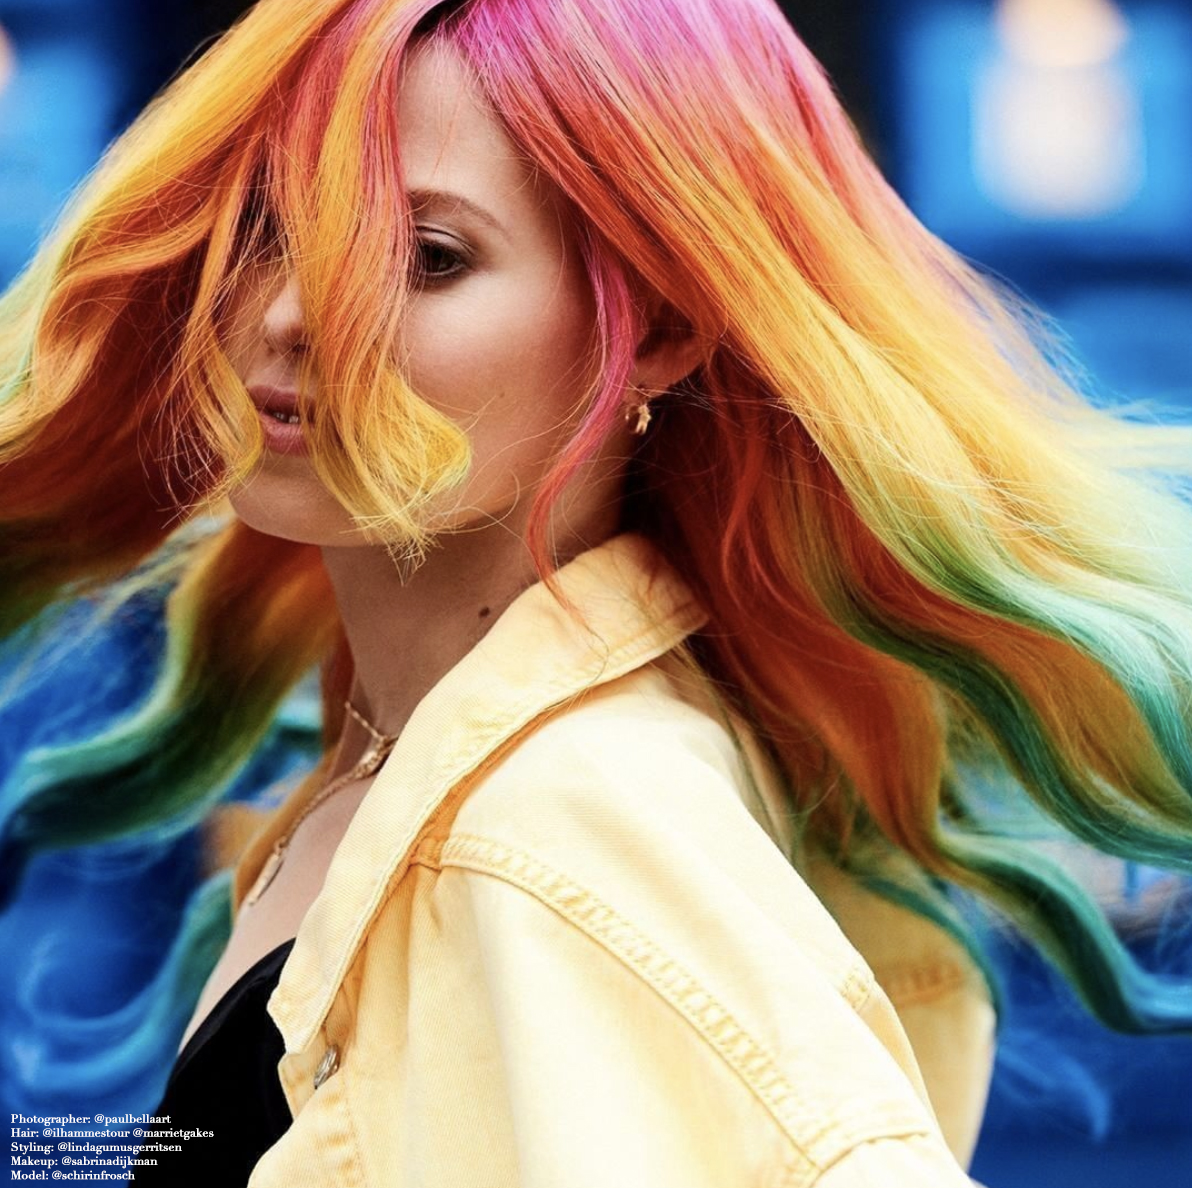 How To Prep Clients for Creative Color - Bangstyle - House of Hair  Inspiration